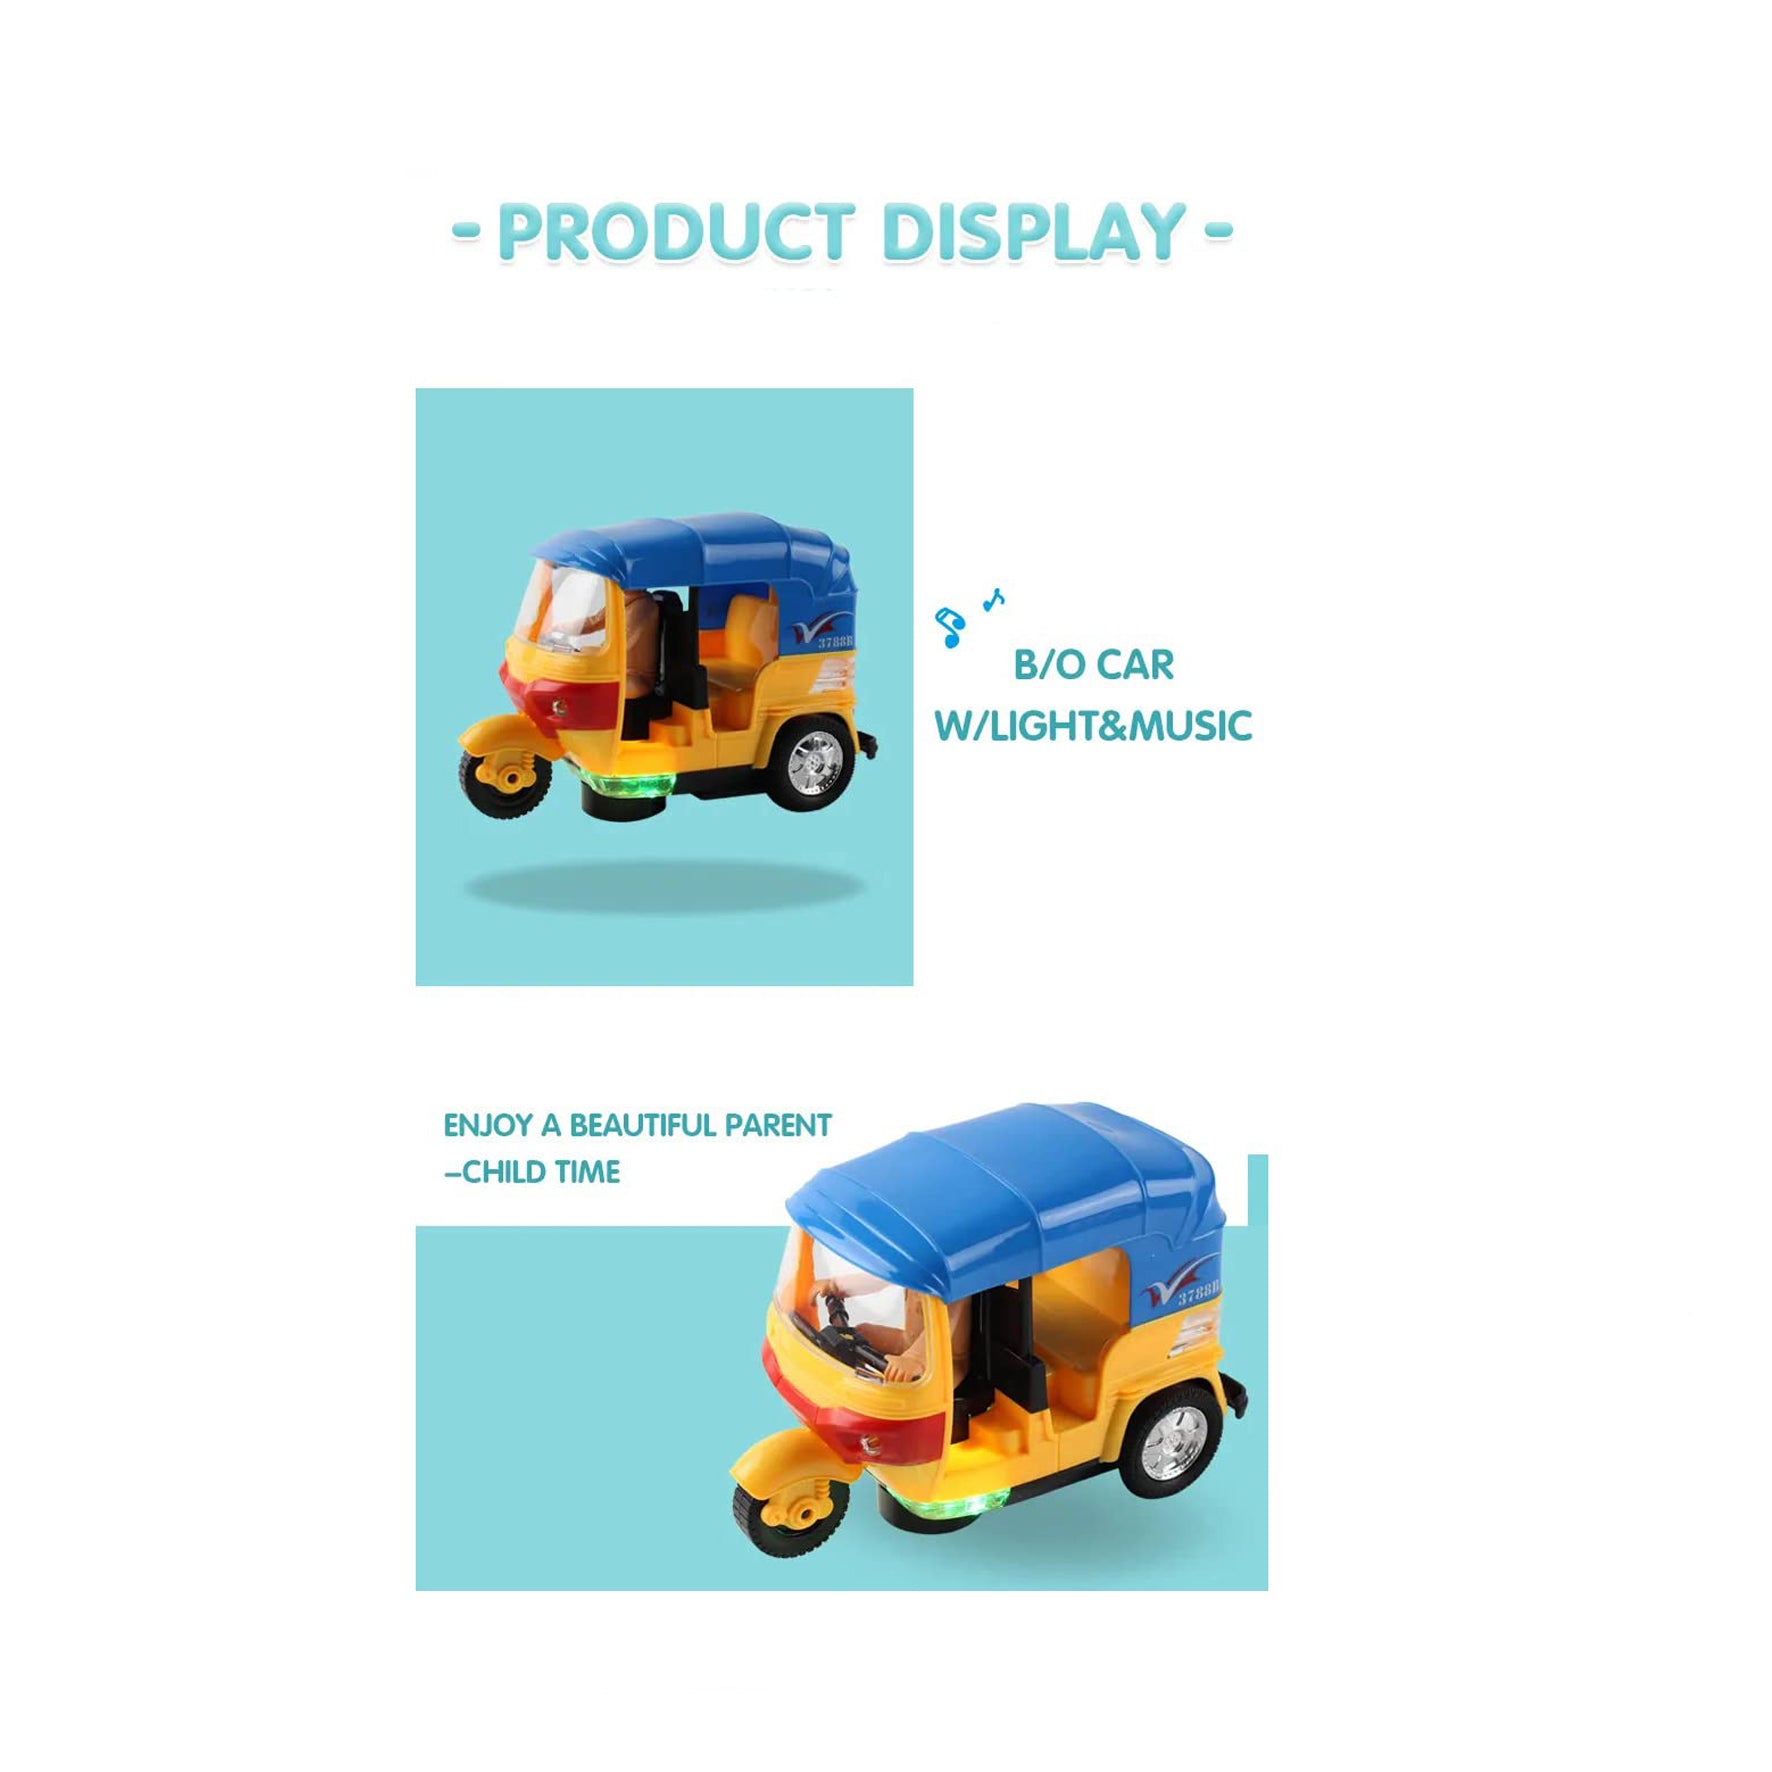 attery Operated auto Rickshaw Tricycle Toy for Kids|Boys|Girls with Light & Music and Bump & go Action (Color-Multi).